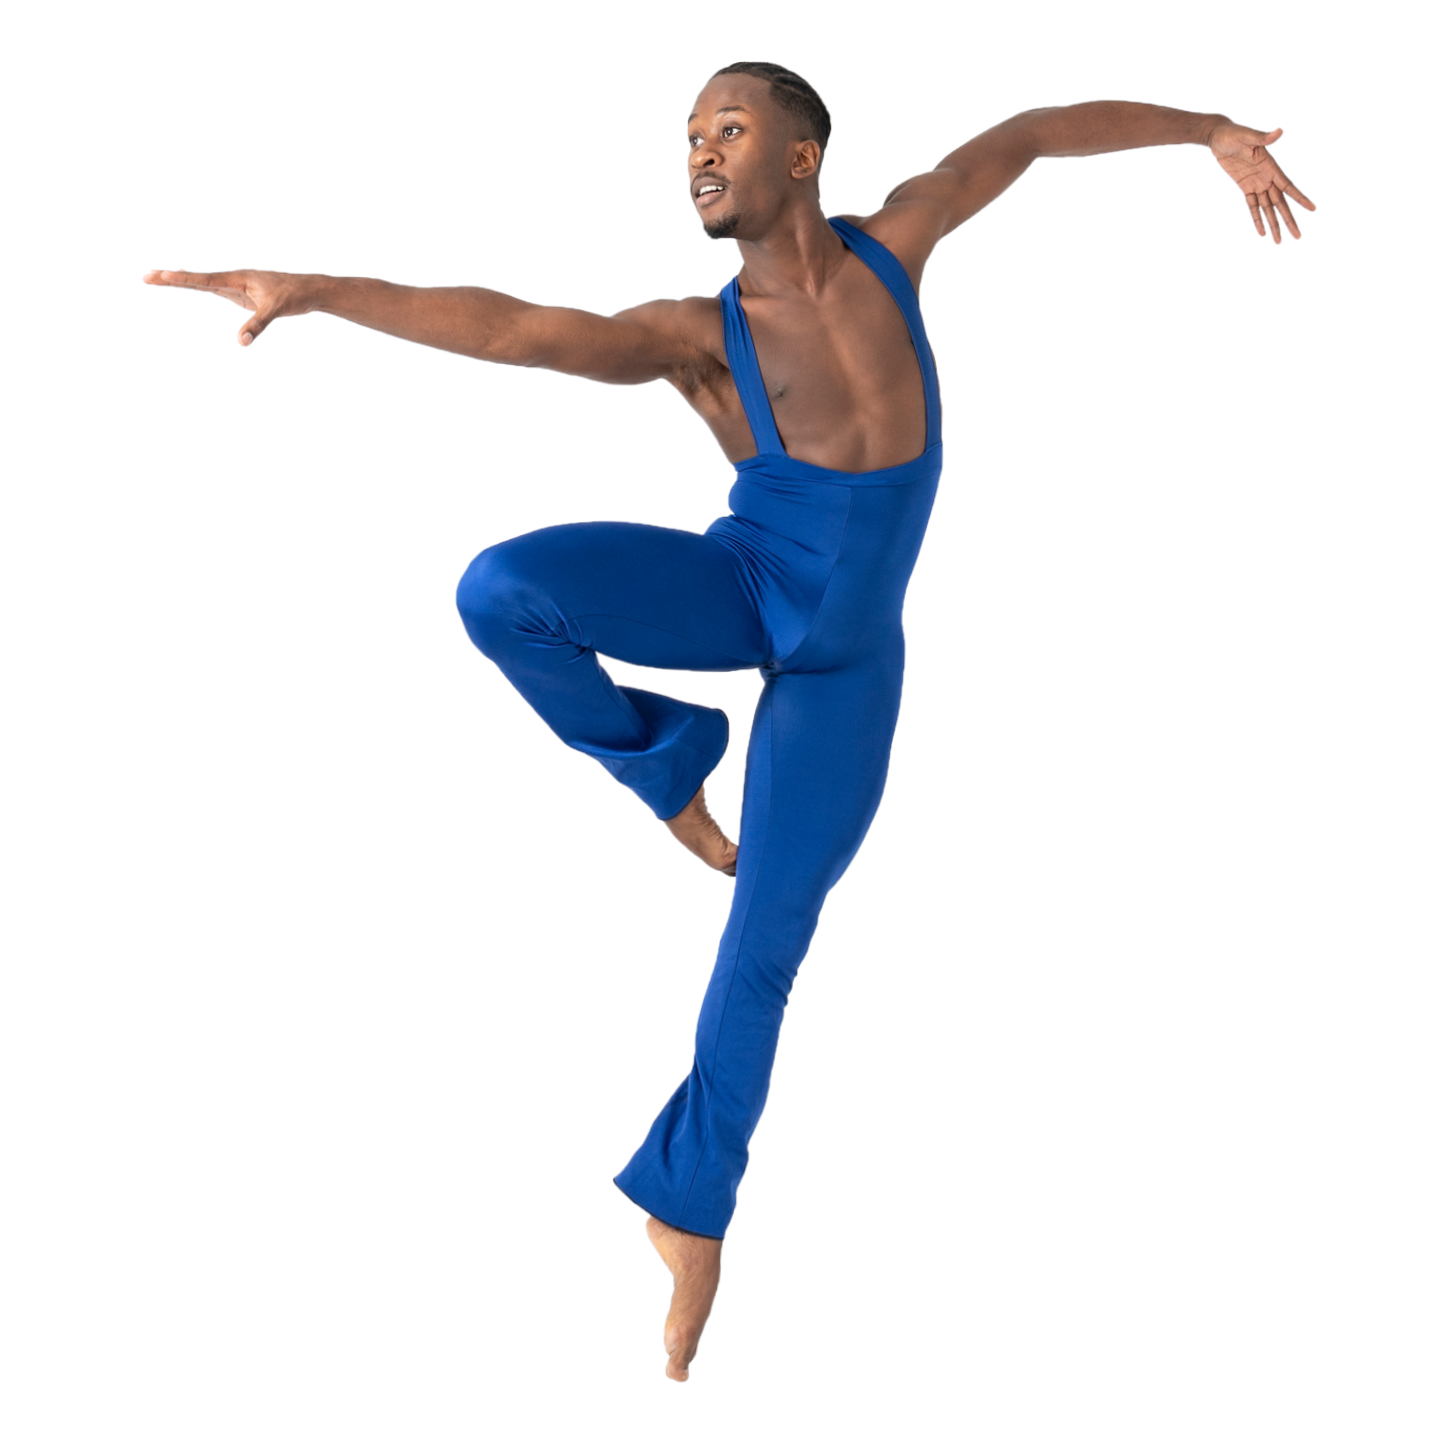 A Black Male modern dancer in a blue unitard, jumping gracefully with one arm outstretched and the other raised and rounded behind him, toes pointed, with one leg in a possé shape.